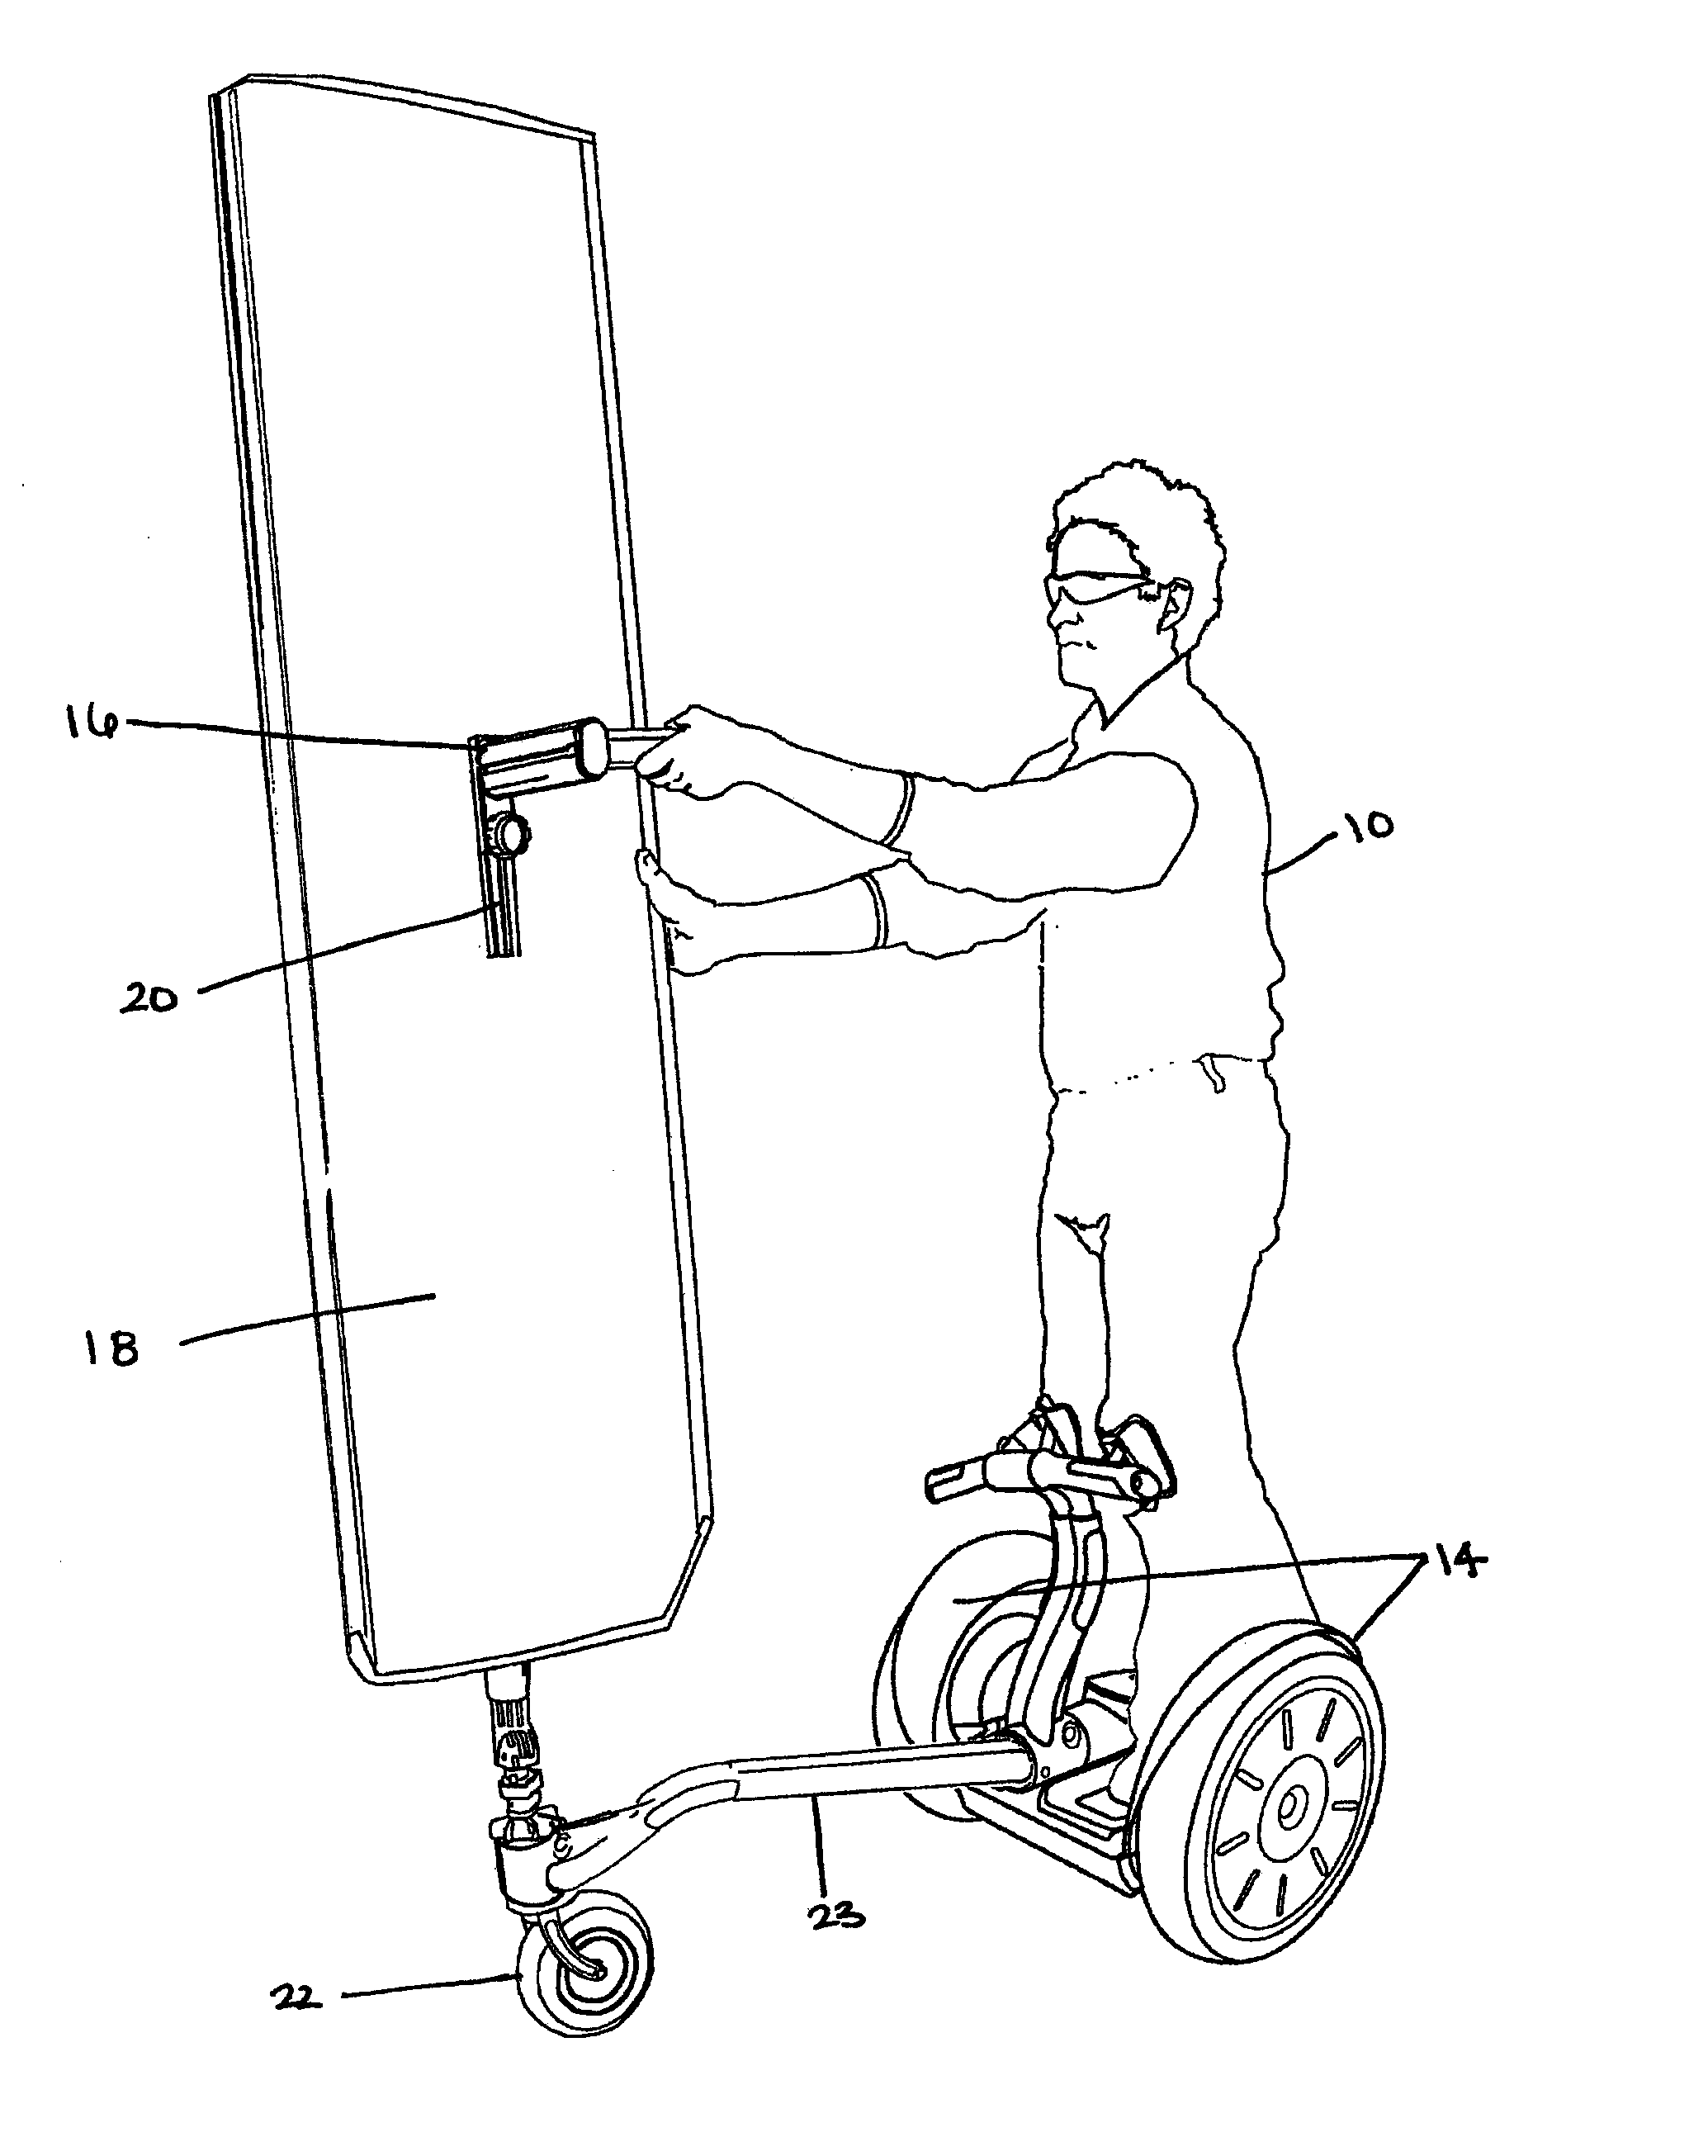 System and method for media display